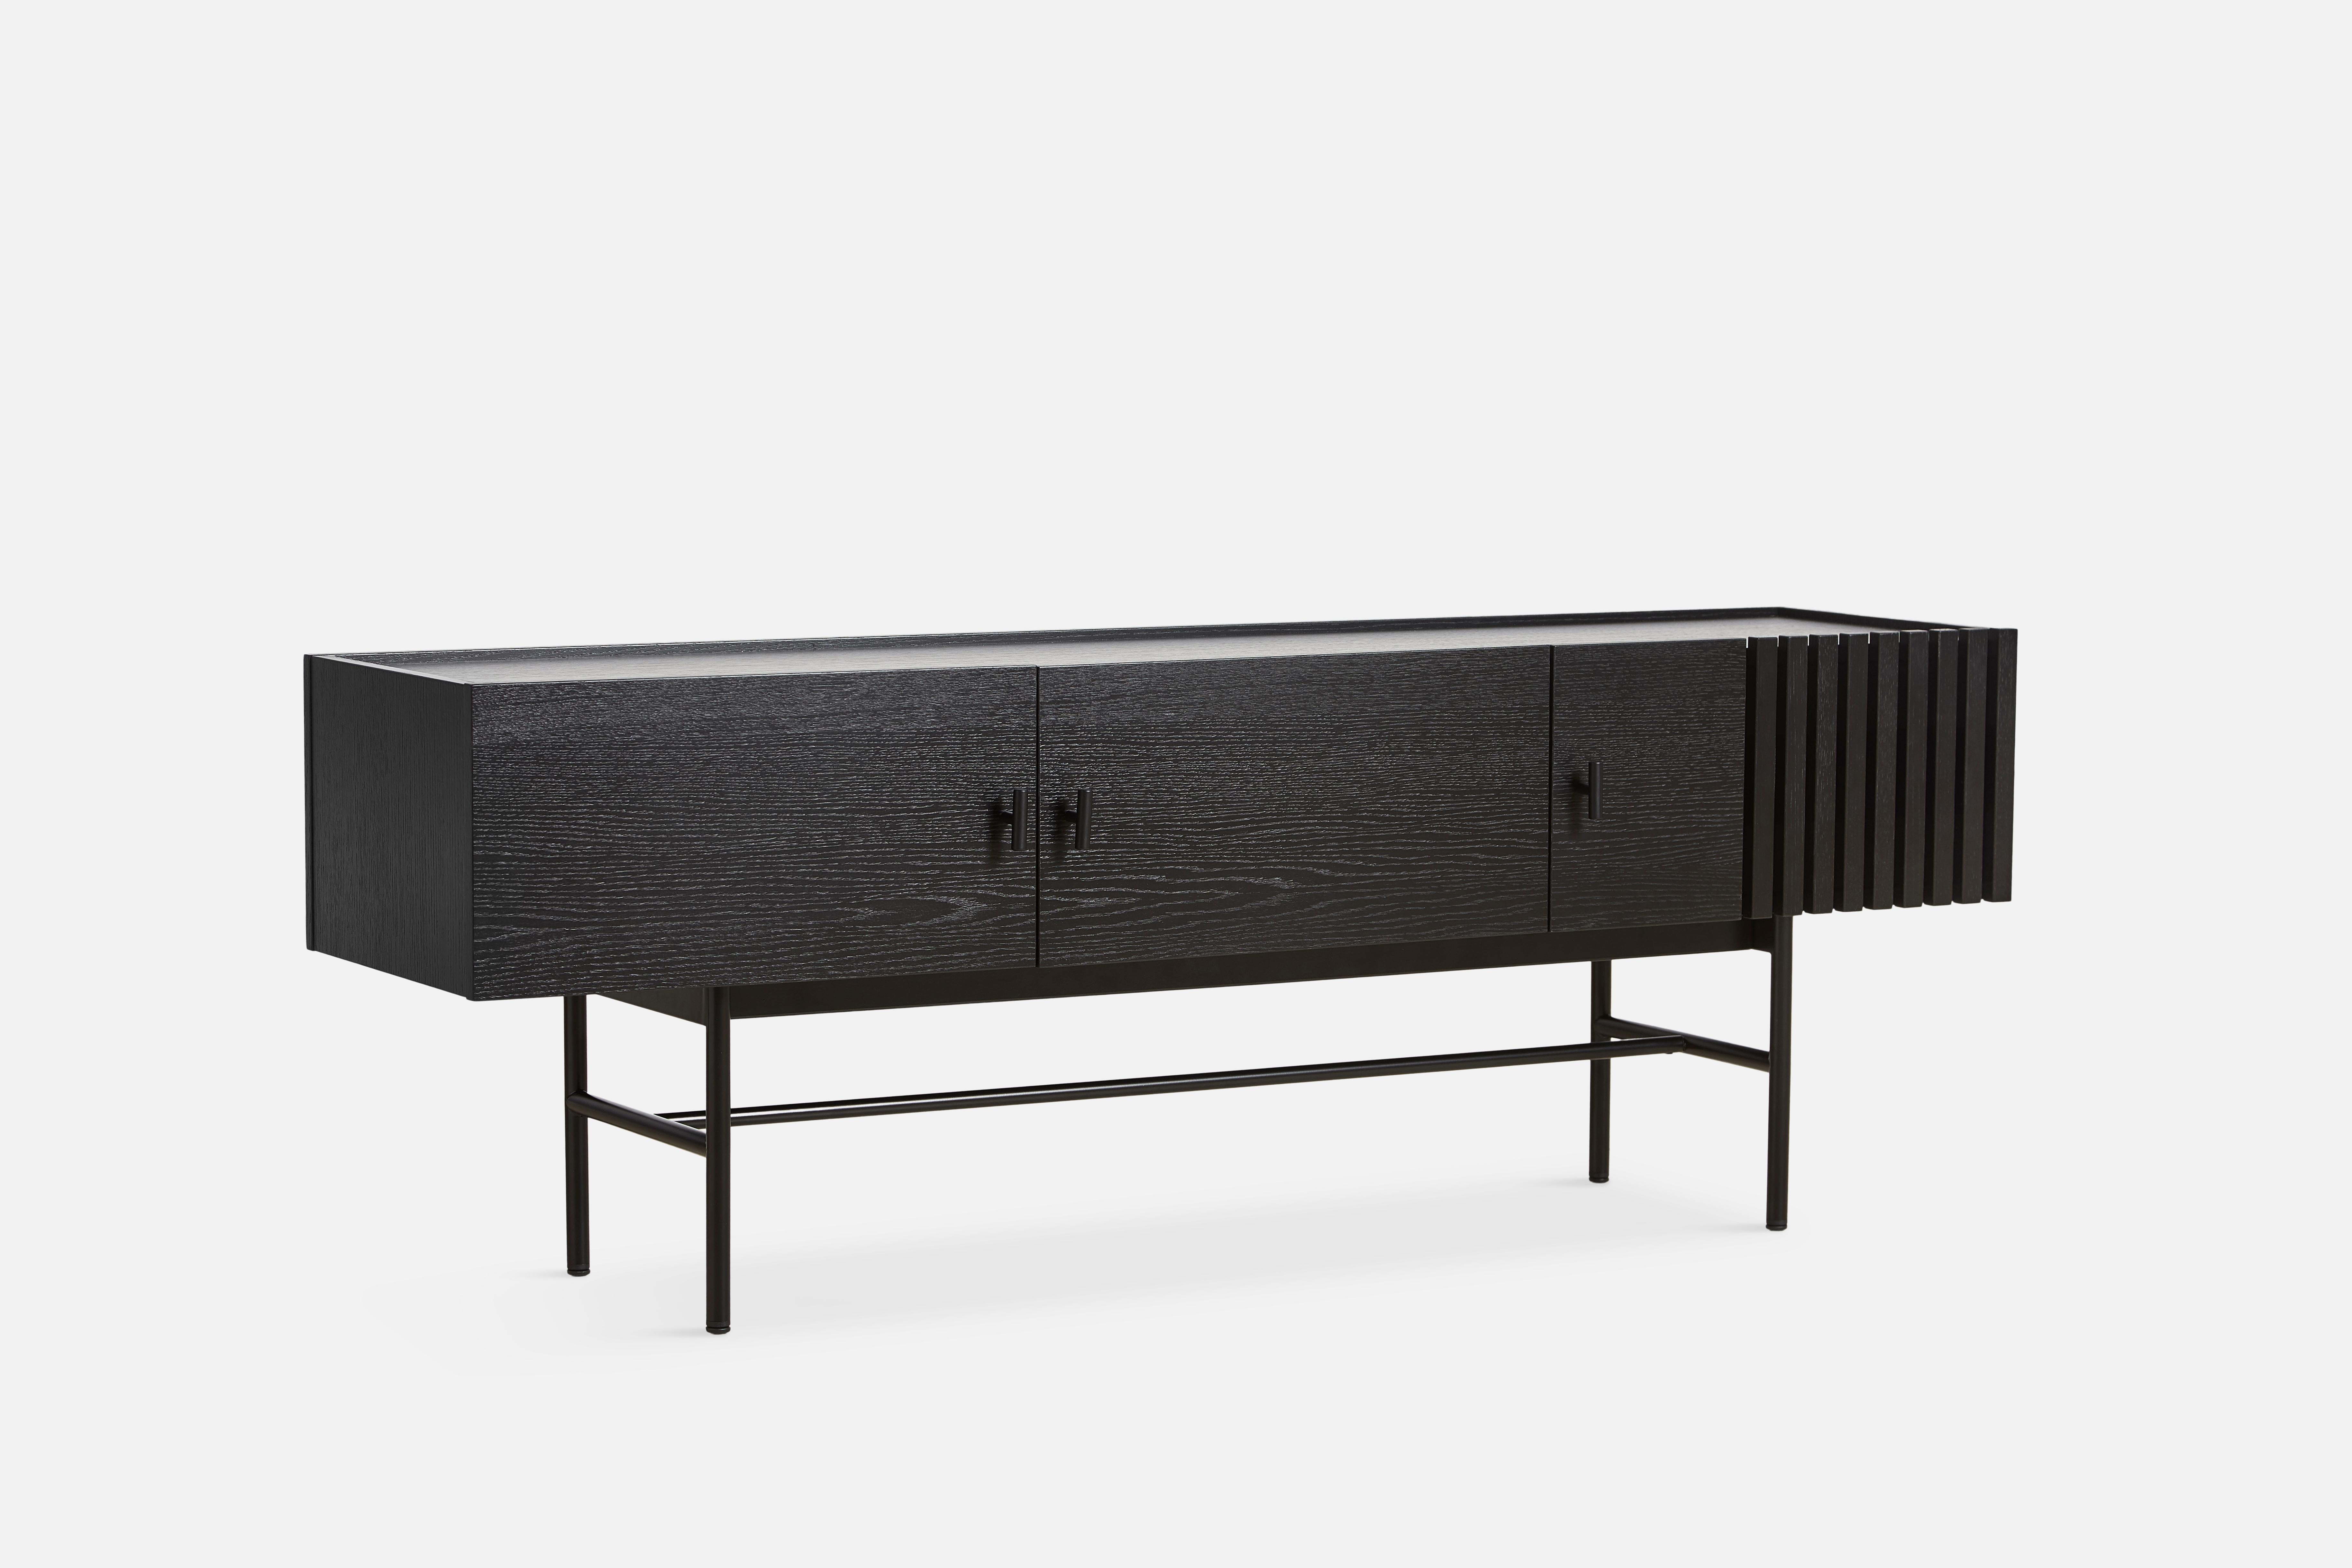 Black oak array low sideboard 150 by Says Who
Materials: Oak, Metal
Dimensions: D 37 x W 150 x H 53 cm
Also available in different colours and materials.

The founders, Mia and Torben Koed, decided to put their 30 years of experience into a new